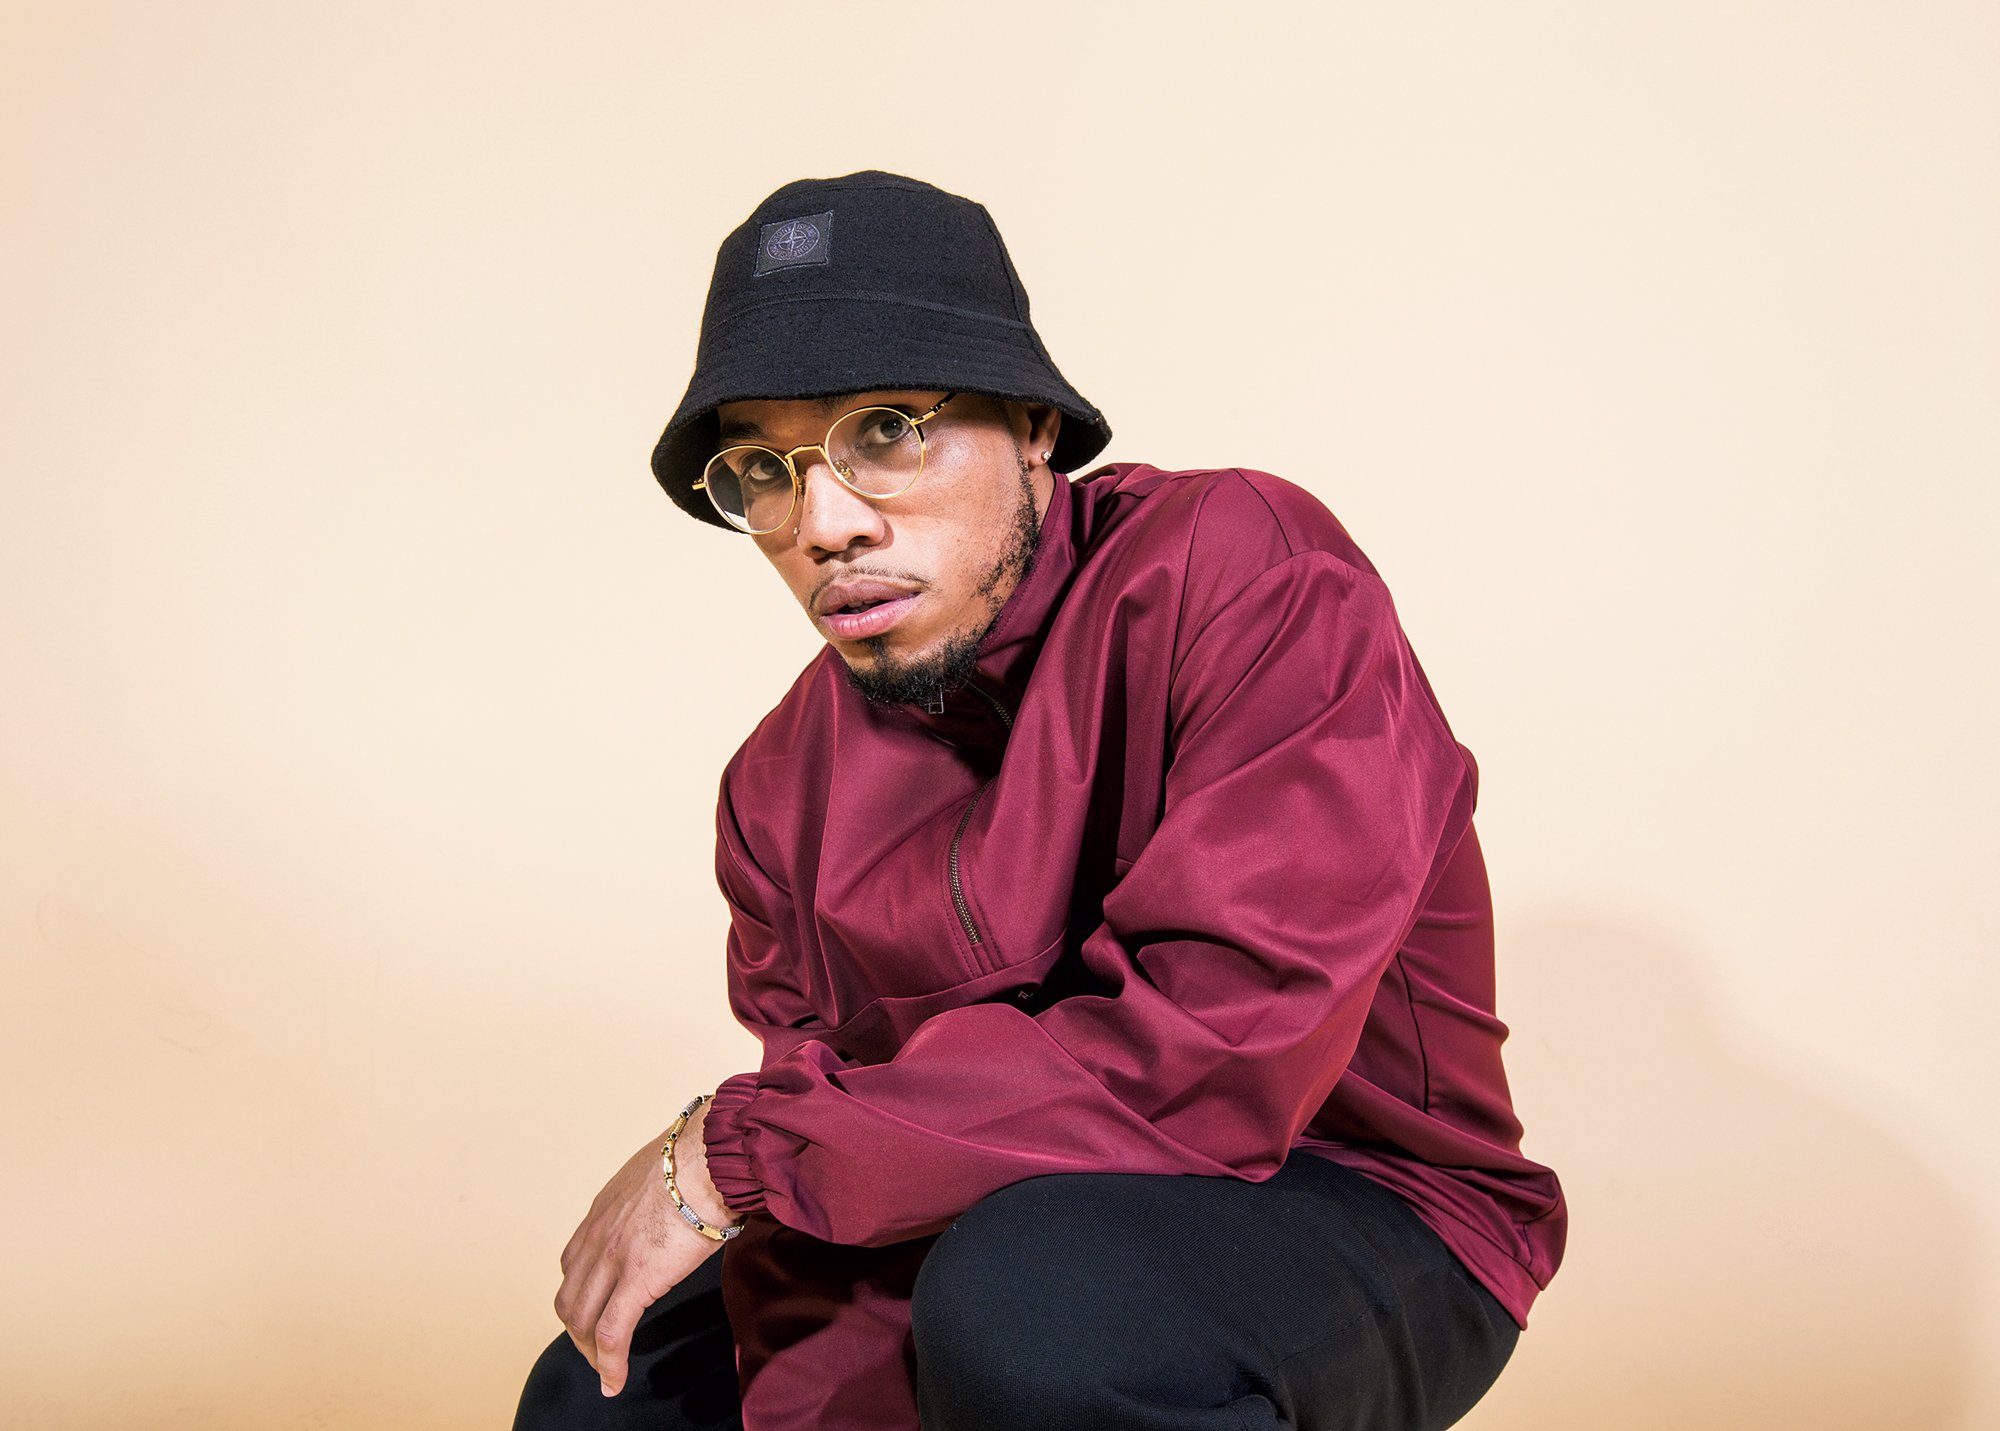 100 Very Best Restaurants, February 2019. Anderson .Paak performs at MGM National Harbor on February 20. Photograph by Israel Ramos.